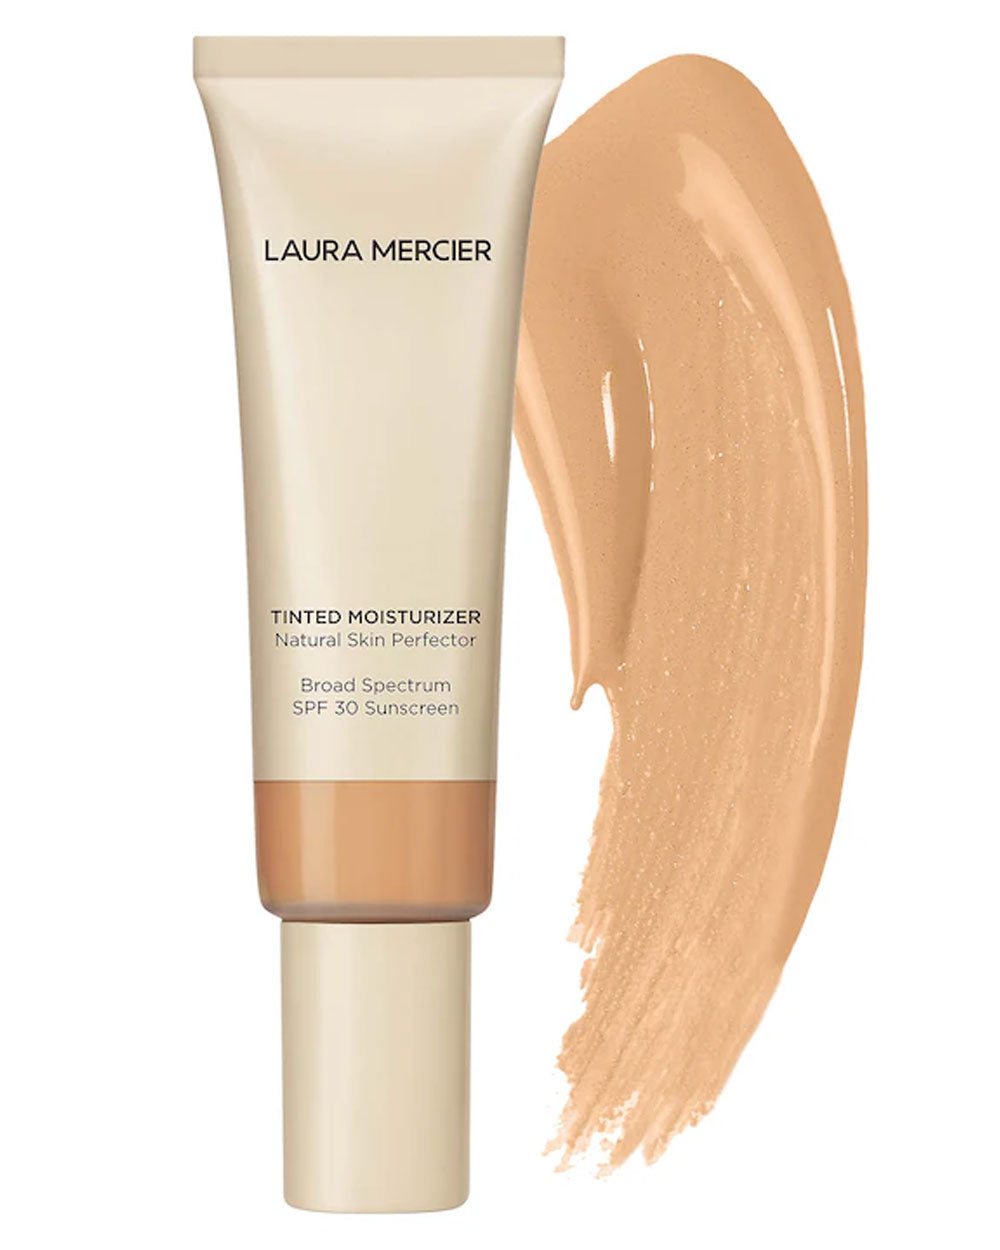 Tinted Moisturizer Natural Skin Perfector in Nude